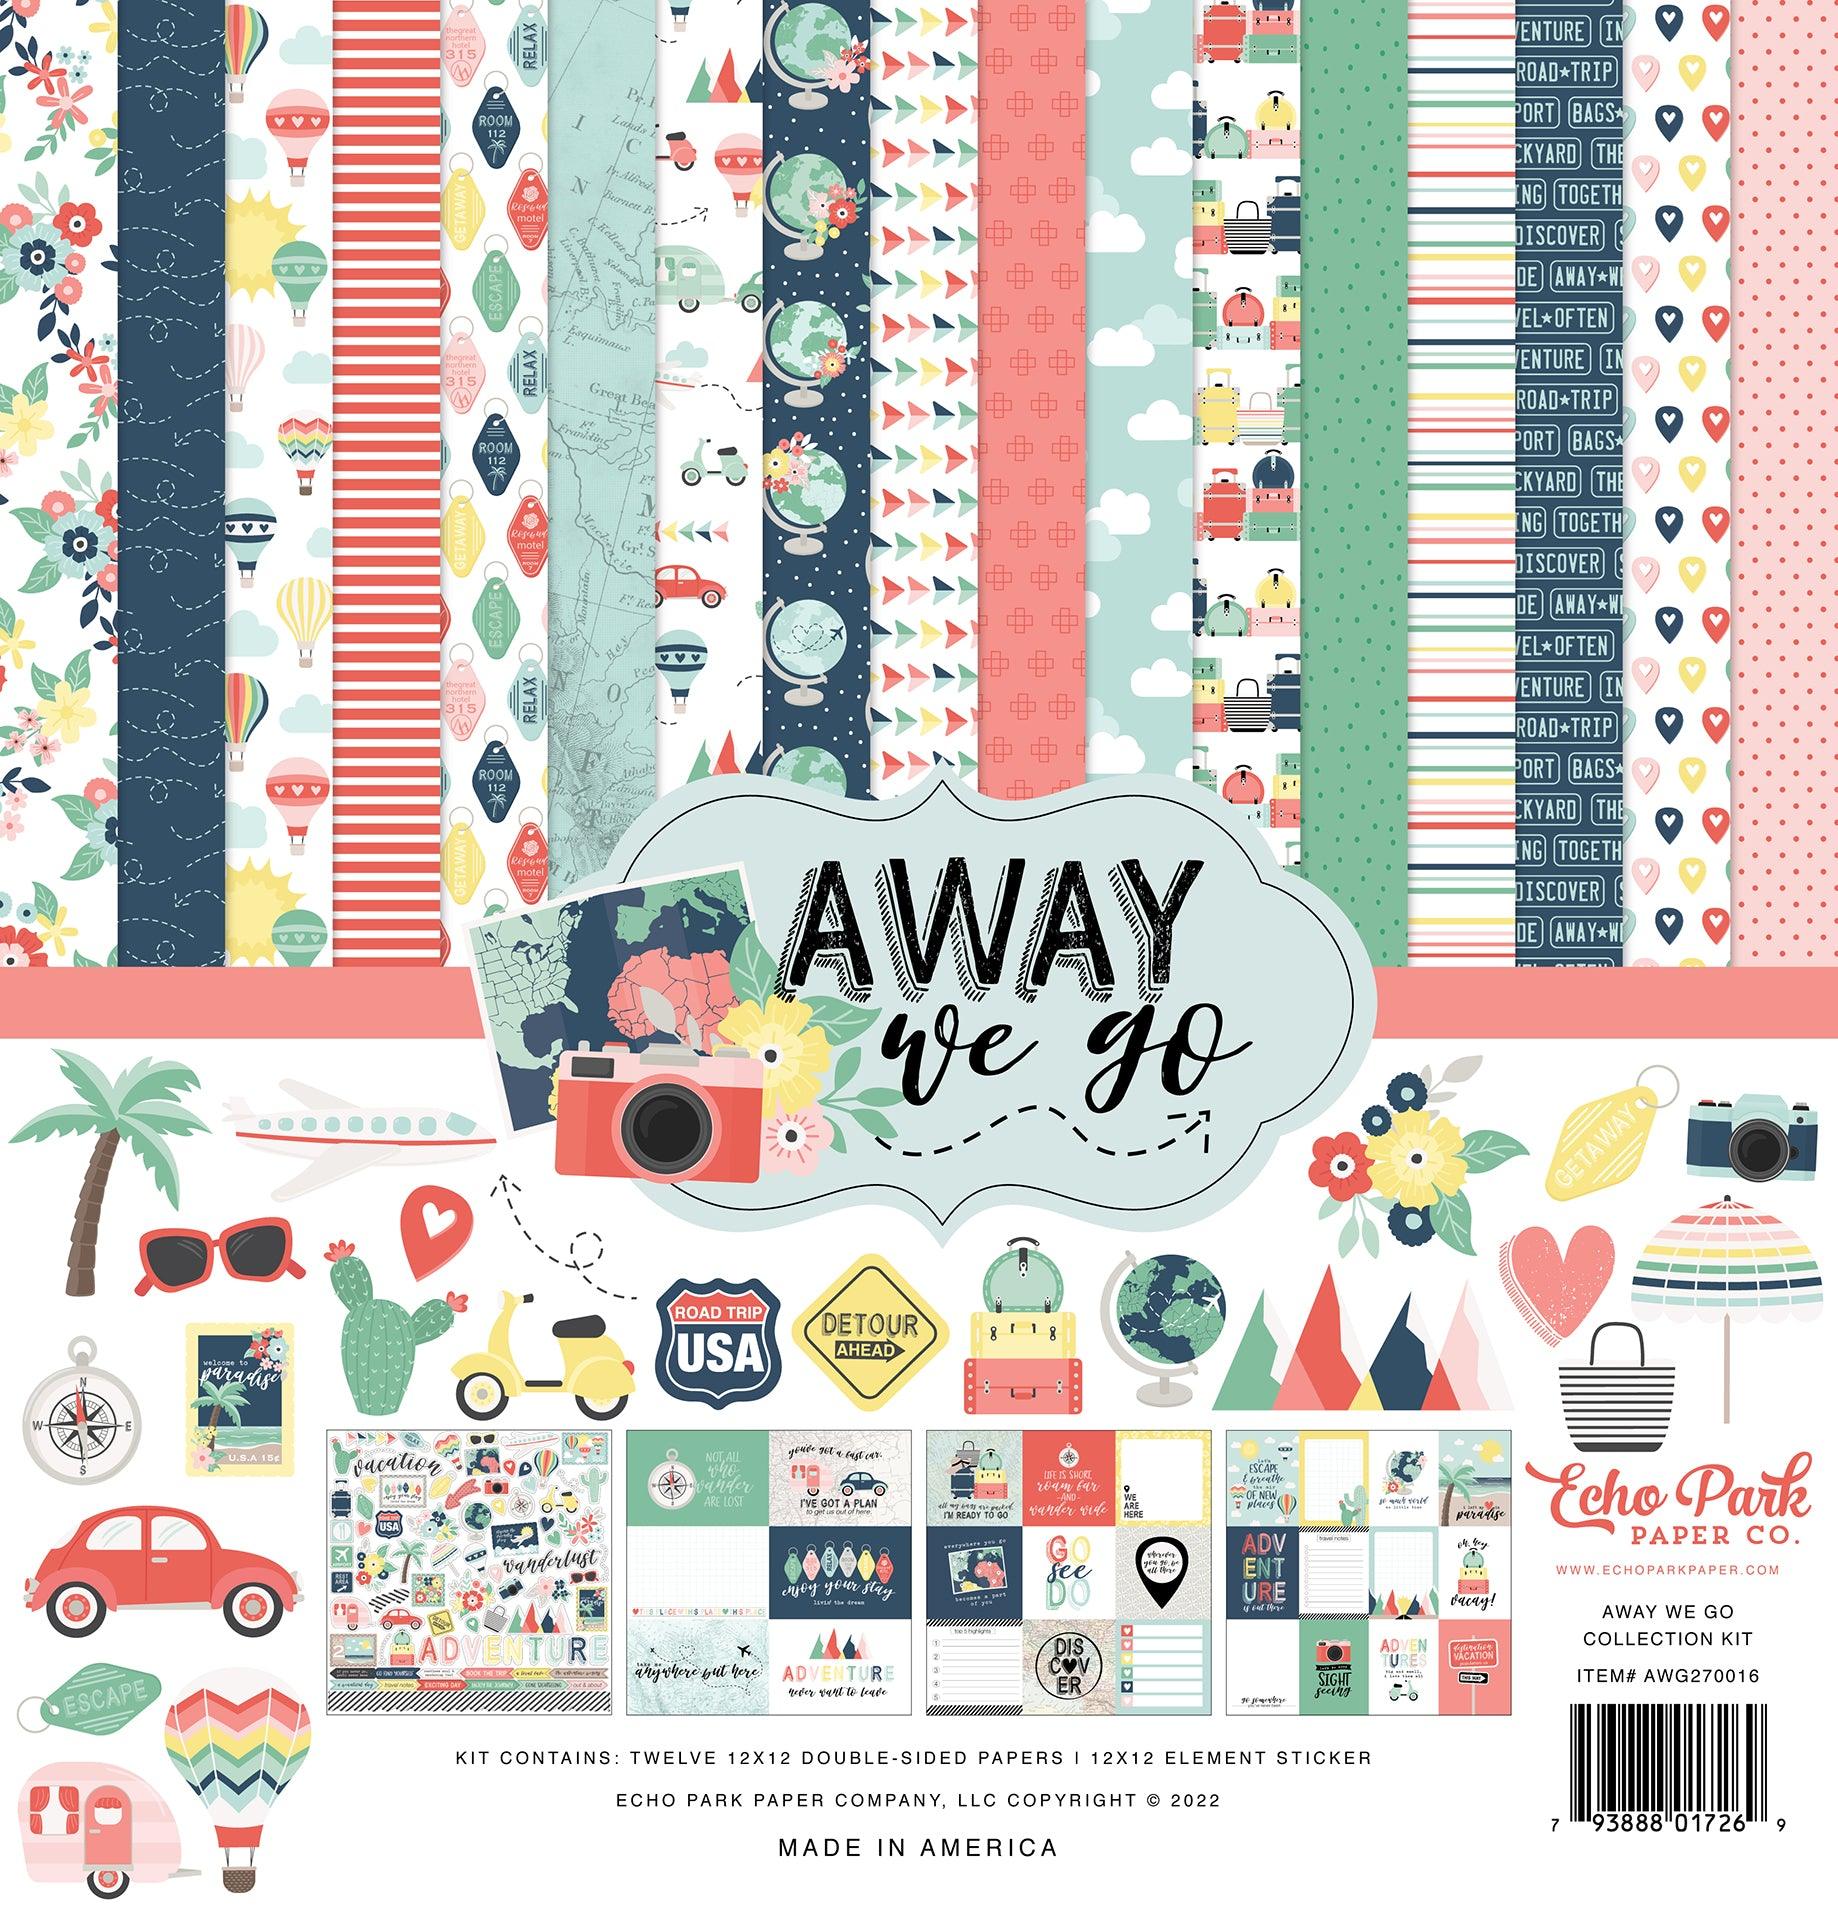 Away We Go Collection 13-Piece Collection Kit by Echo Park Paper